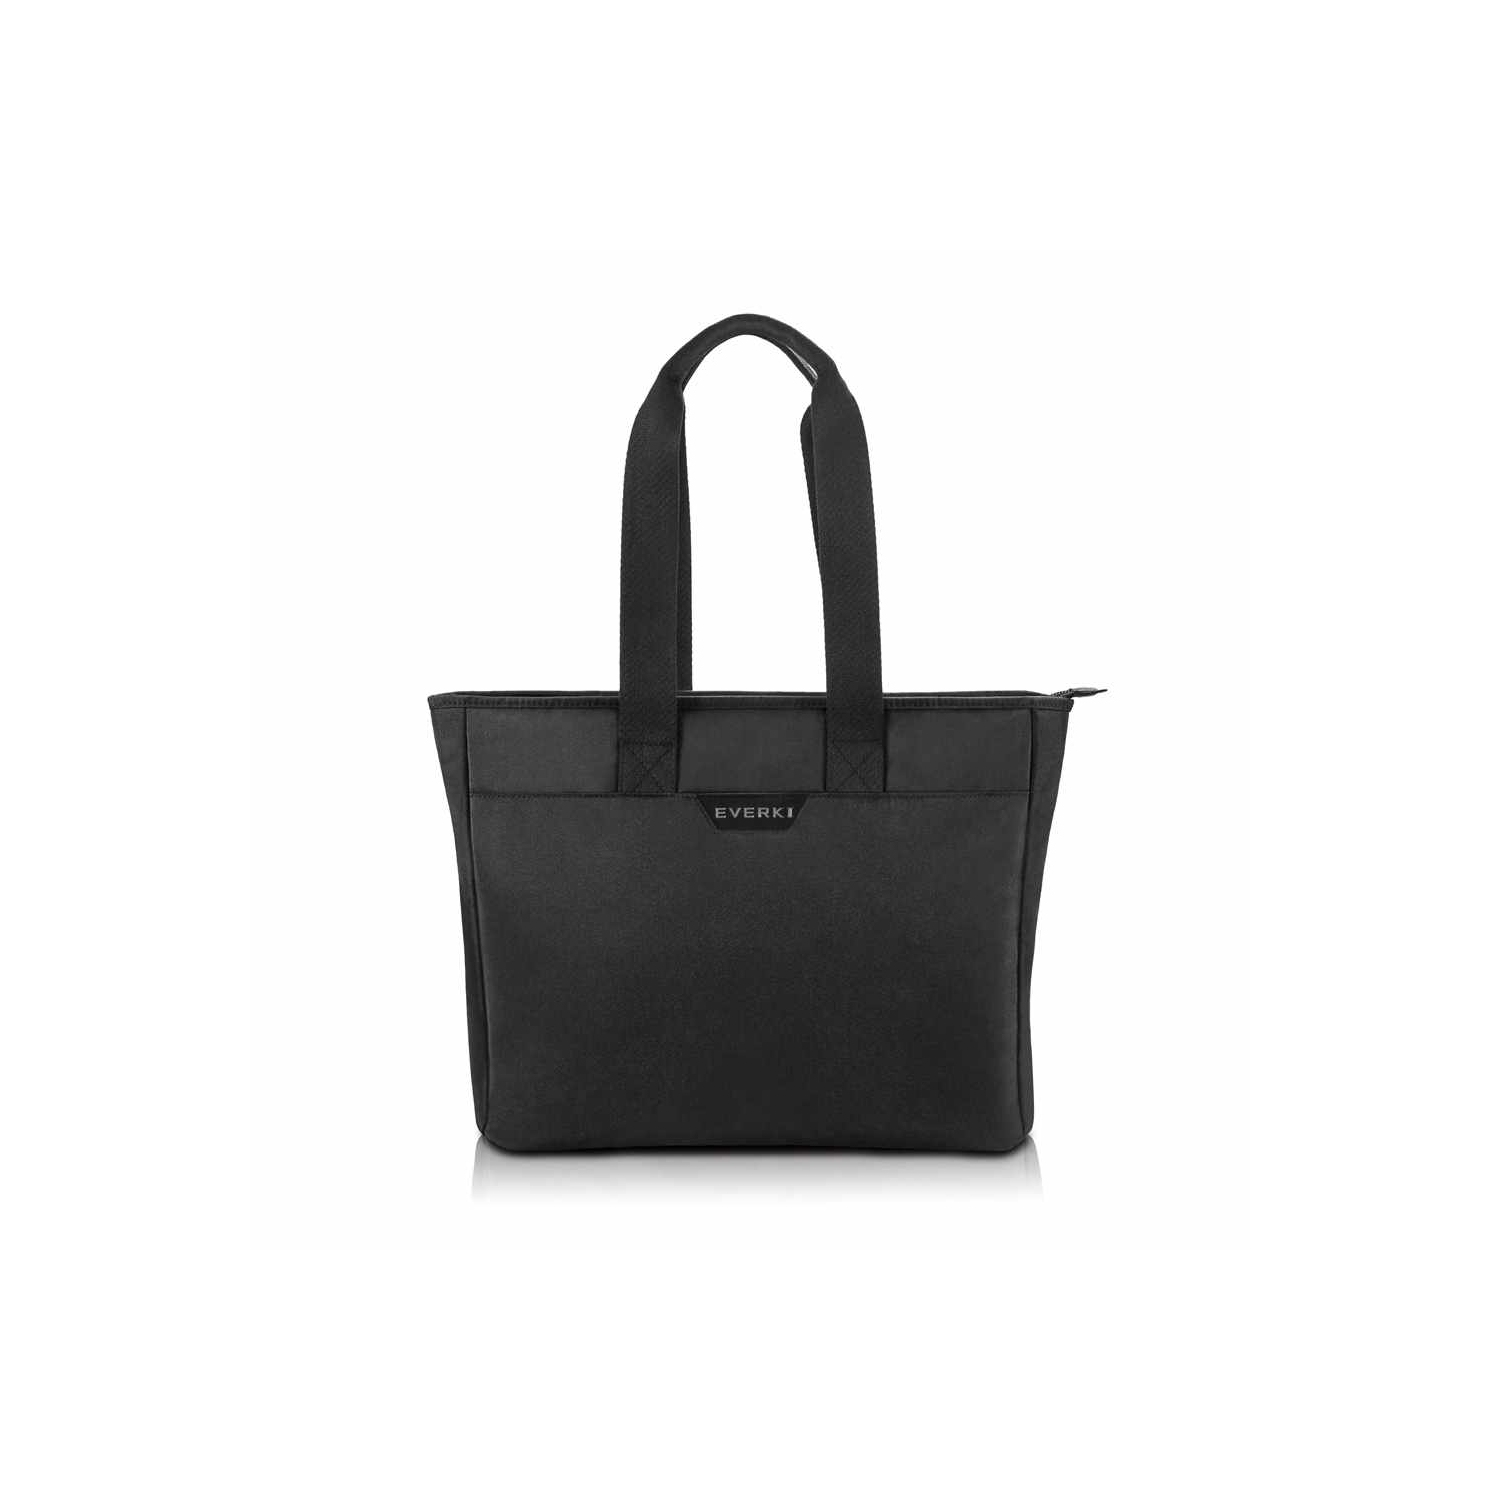 Everki Business Women’s Slim Laptop Tote Black up to 15.6 inch Bags and Sleeves EKB418